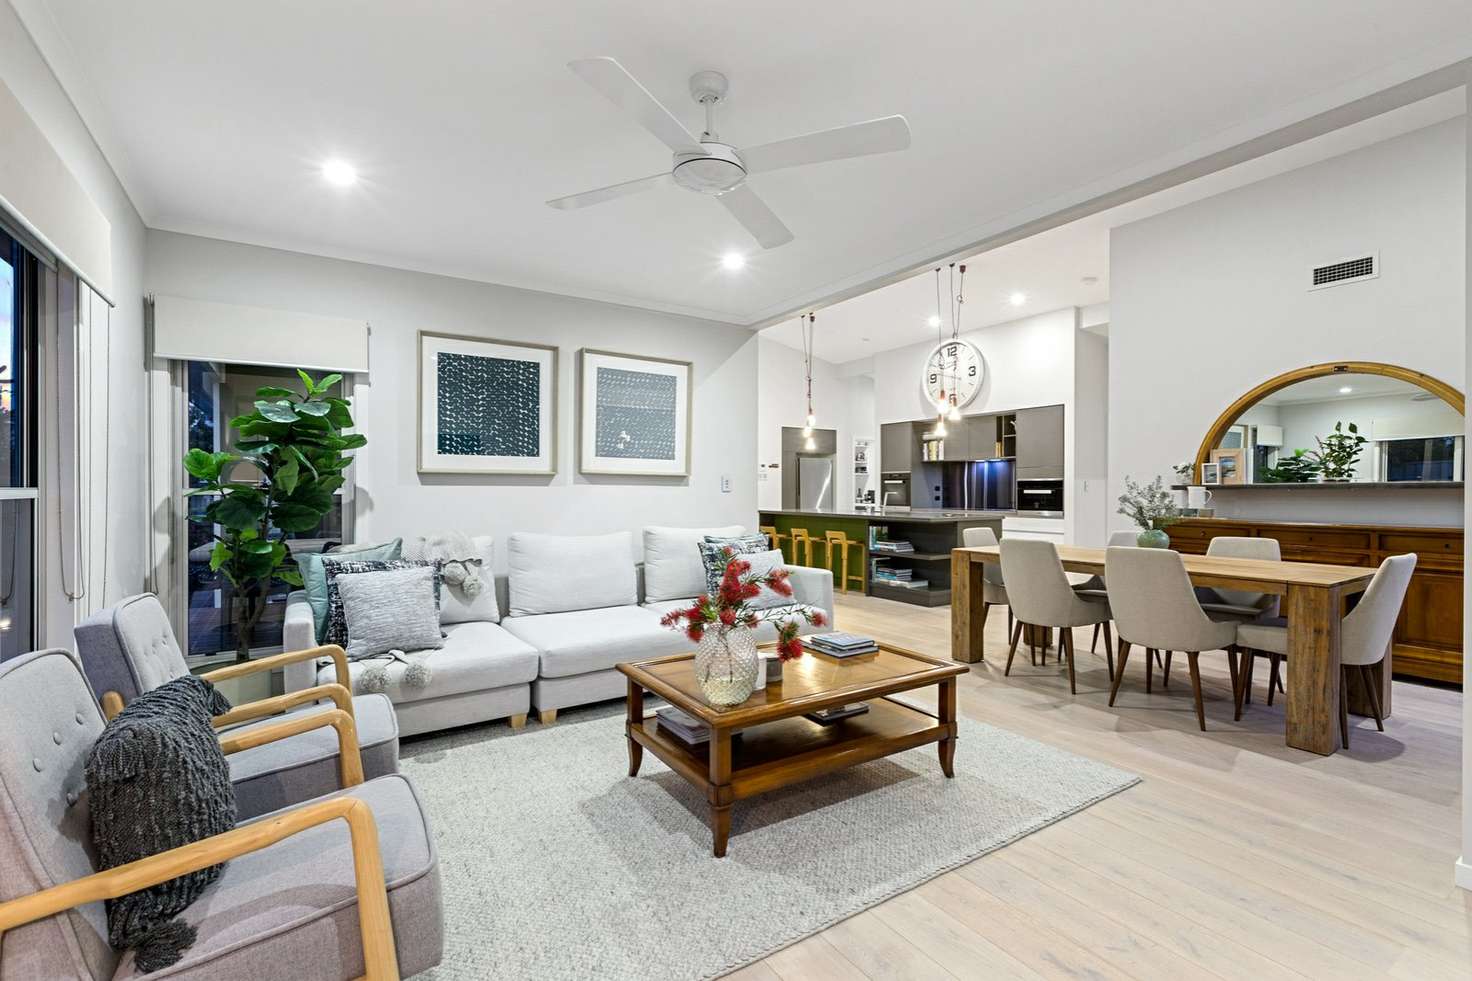 Main view of Homely house listing, 36 Sailfish Way, Kingscliff NSW 2487